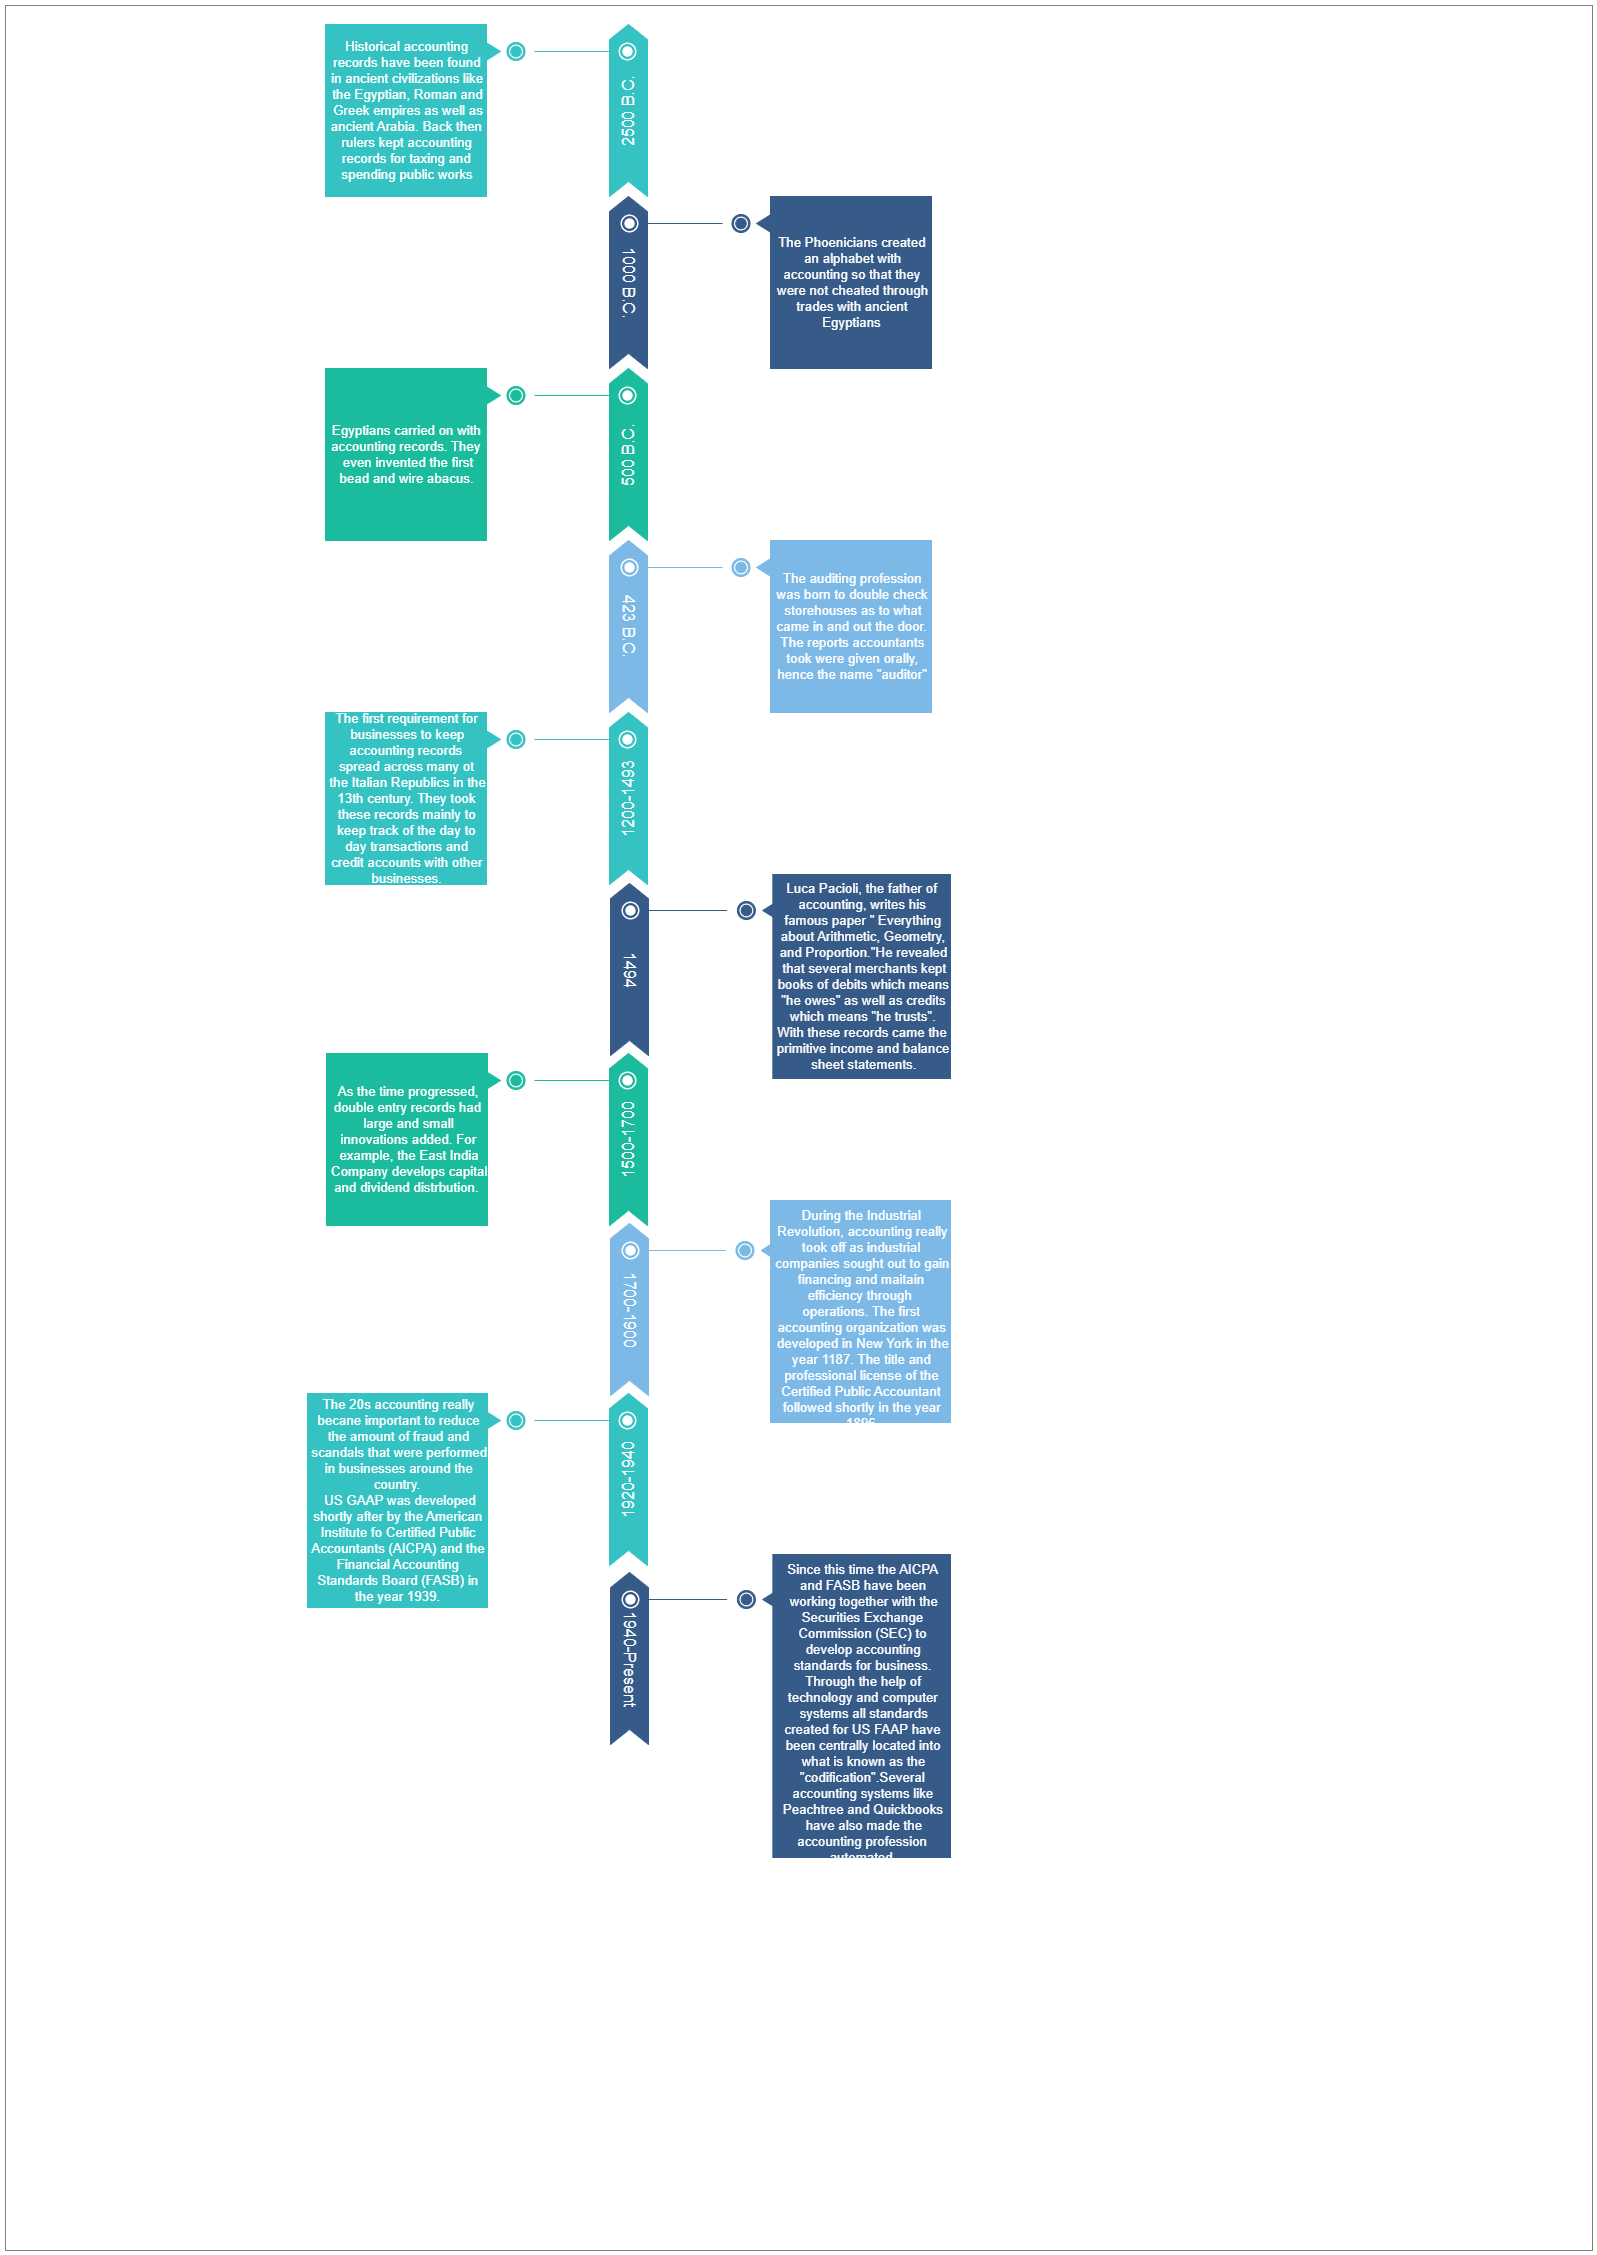 The accounting history timeline diagram shows the entire history of accounting, starting from 2500 BC showing the accounting records from an ancient civilization, like the Egyptian/Roman/Greek empires where the rulers or Kings kept accounting records for 